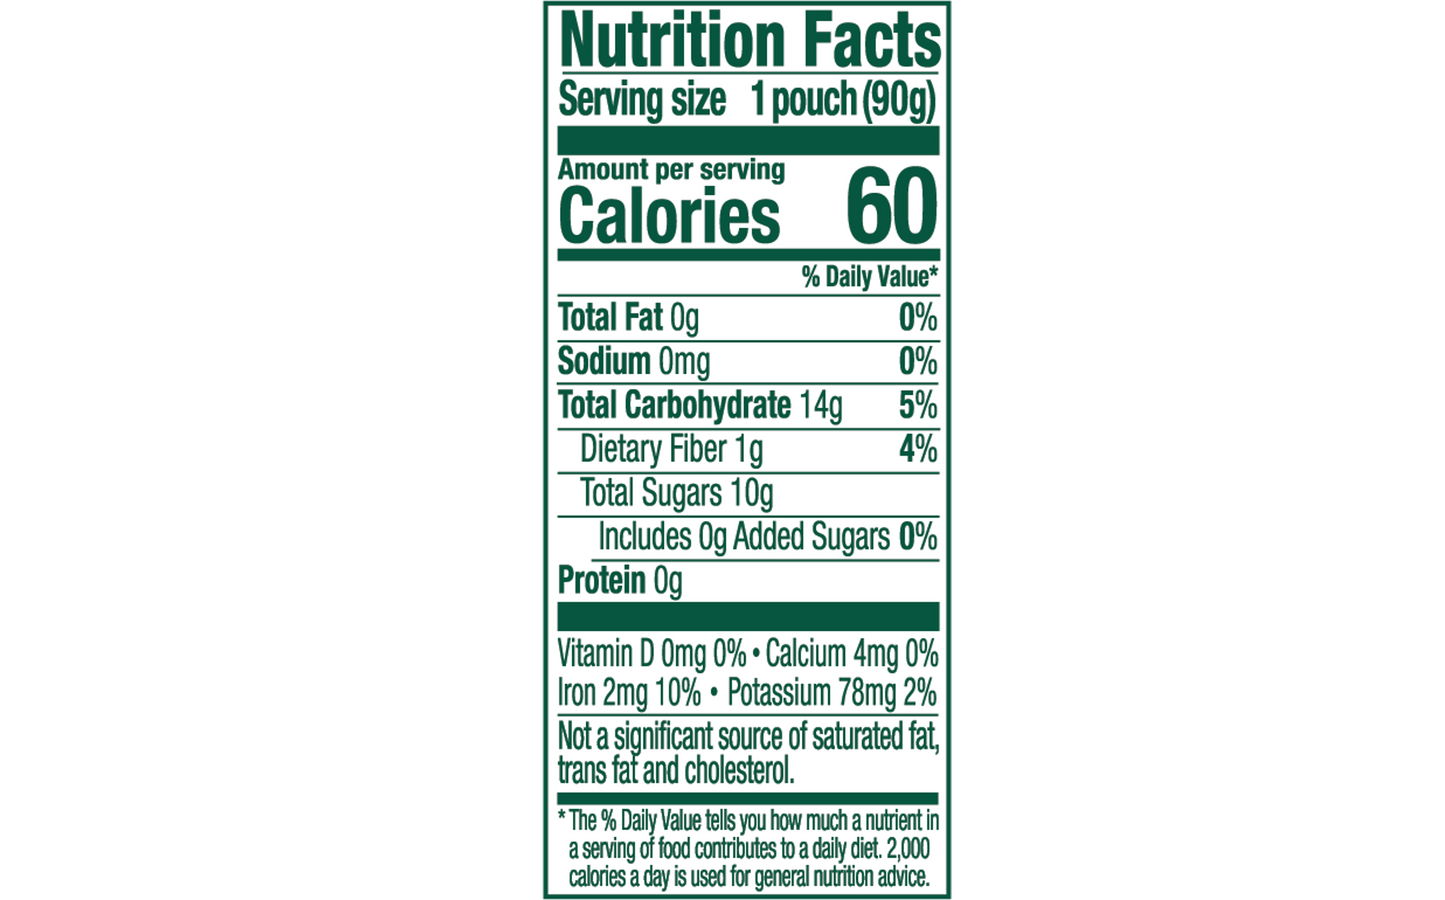 Nutrition facts for Buddy Fruits Mango, Banana, & Passionfruit fruit pouch.